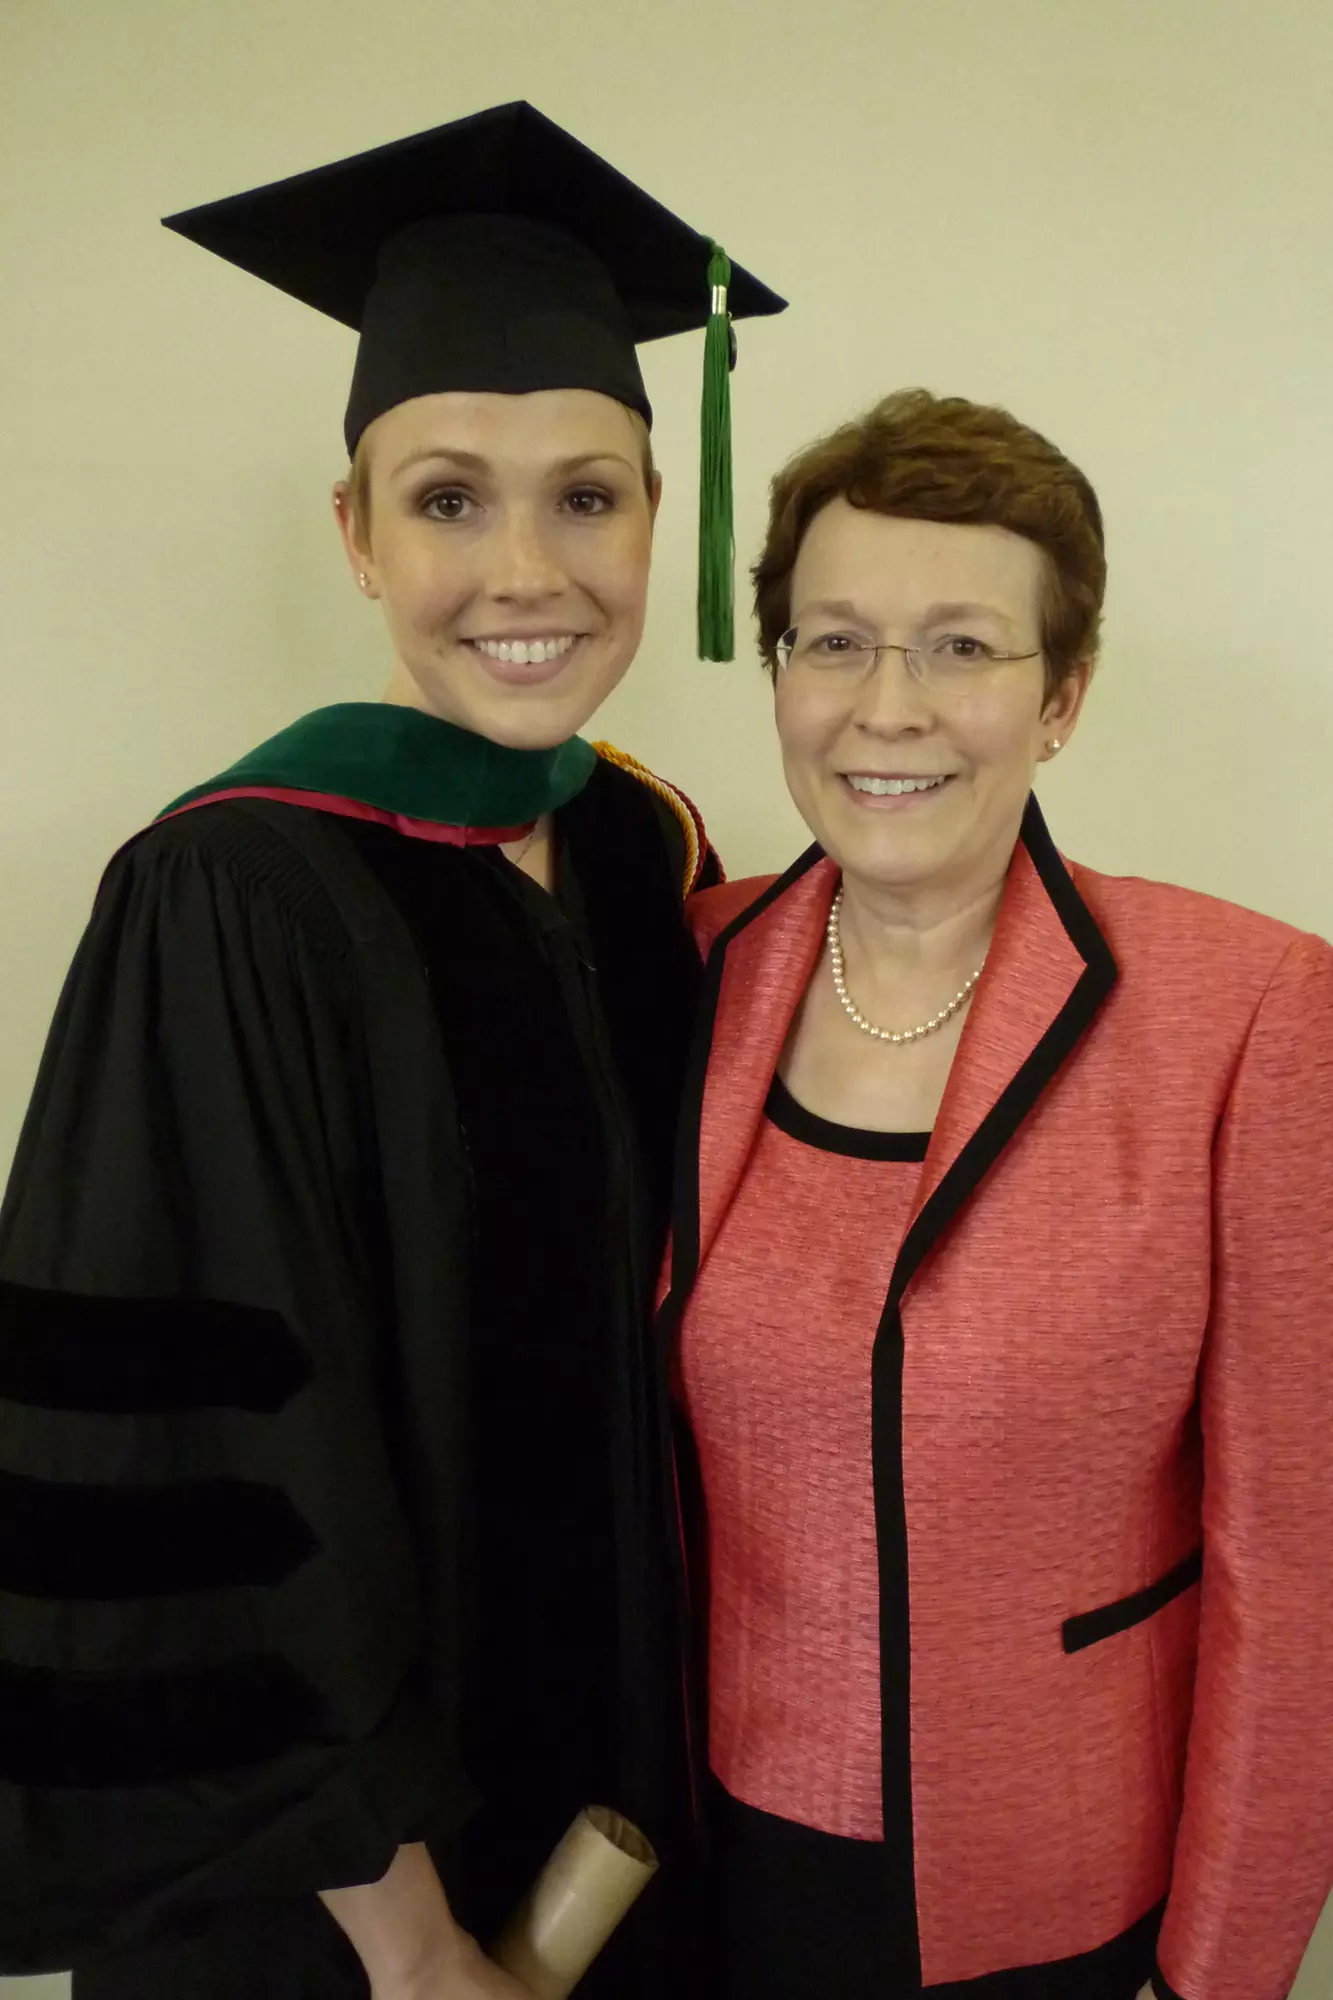 Dr. Orman's mom proudly stands by her daughter at her medical school graduation.